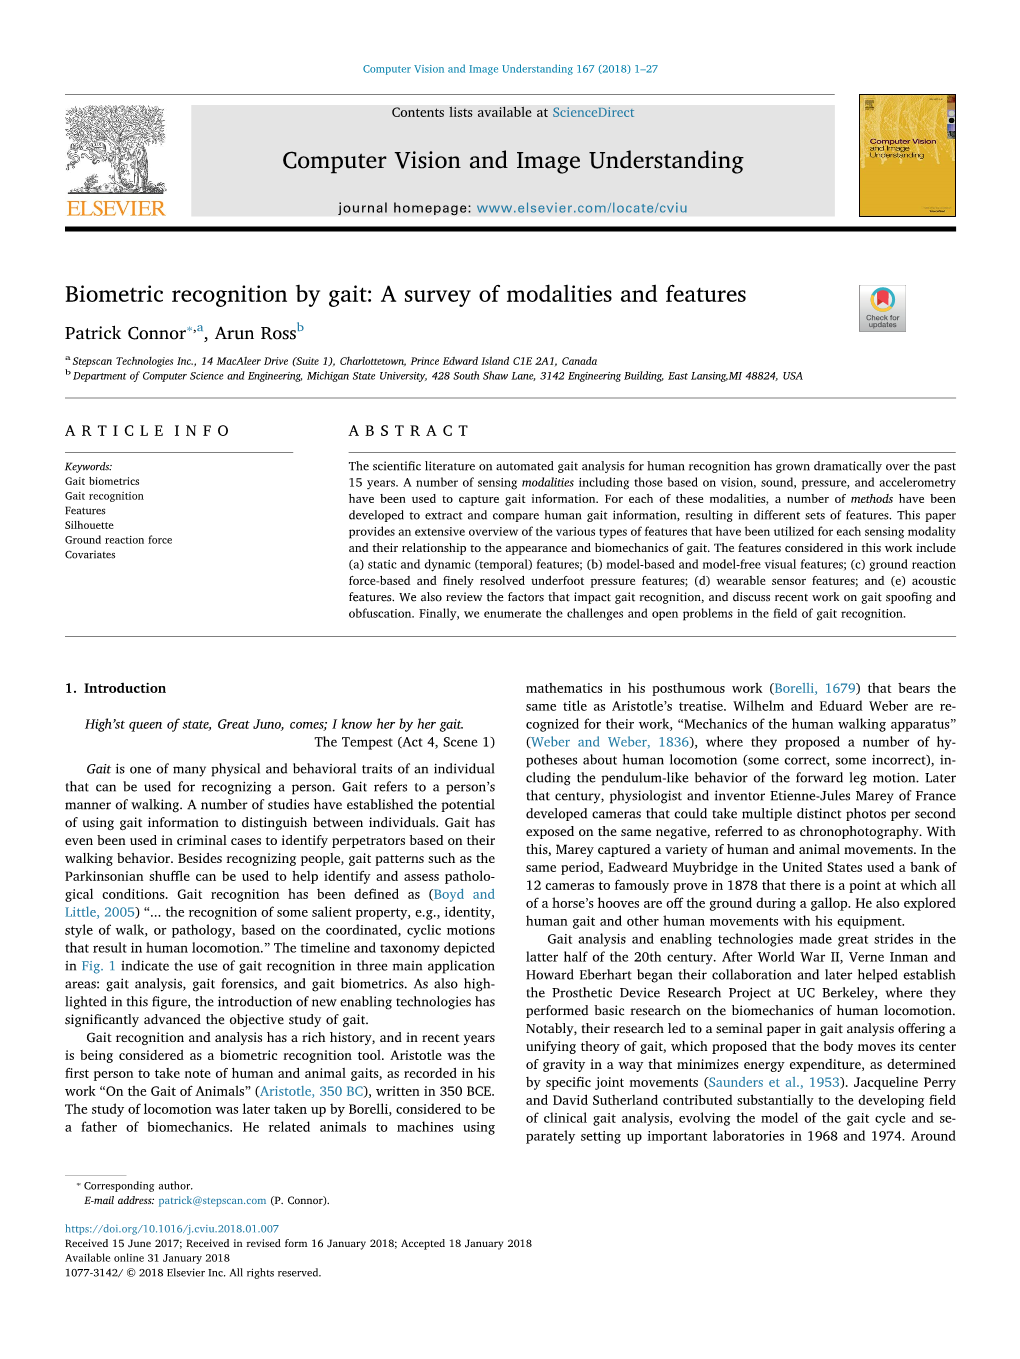 Biometric Recognition by Gait: a Survey of Modalities and Features